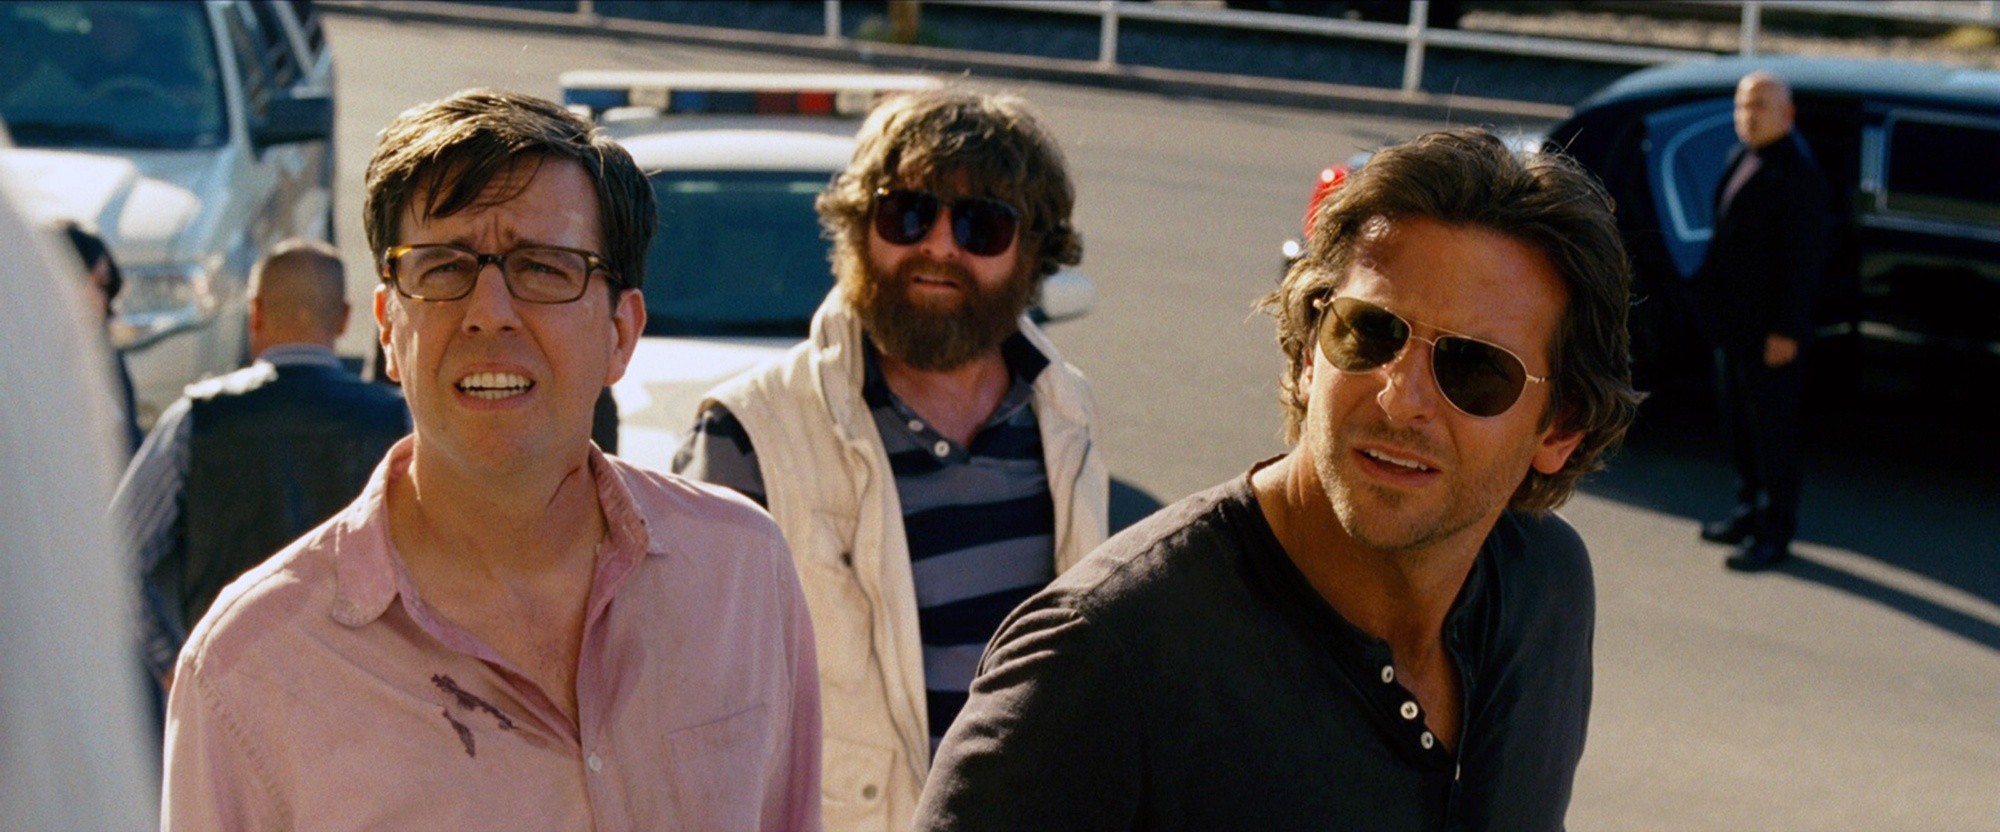 Ed Helms, Zach Galifianakis and Bradley Cooper in Warner Bros. Pictures' The Hangover Part III (2013)